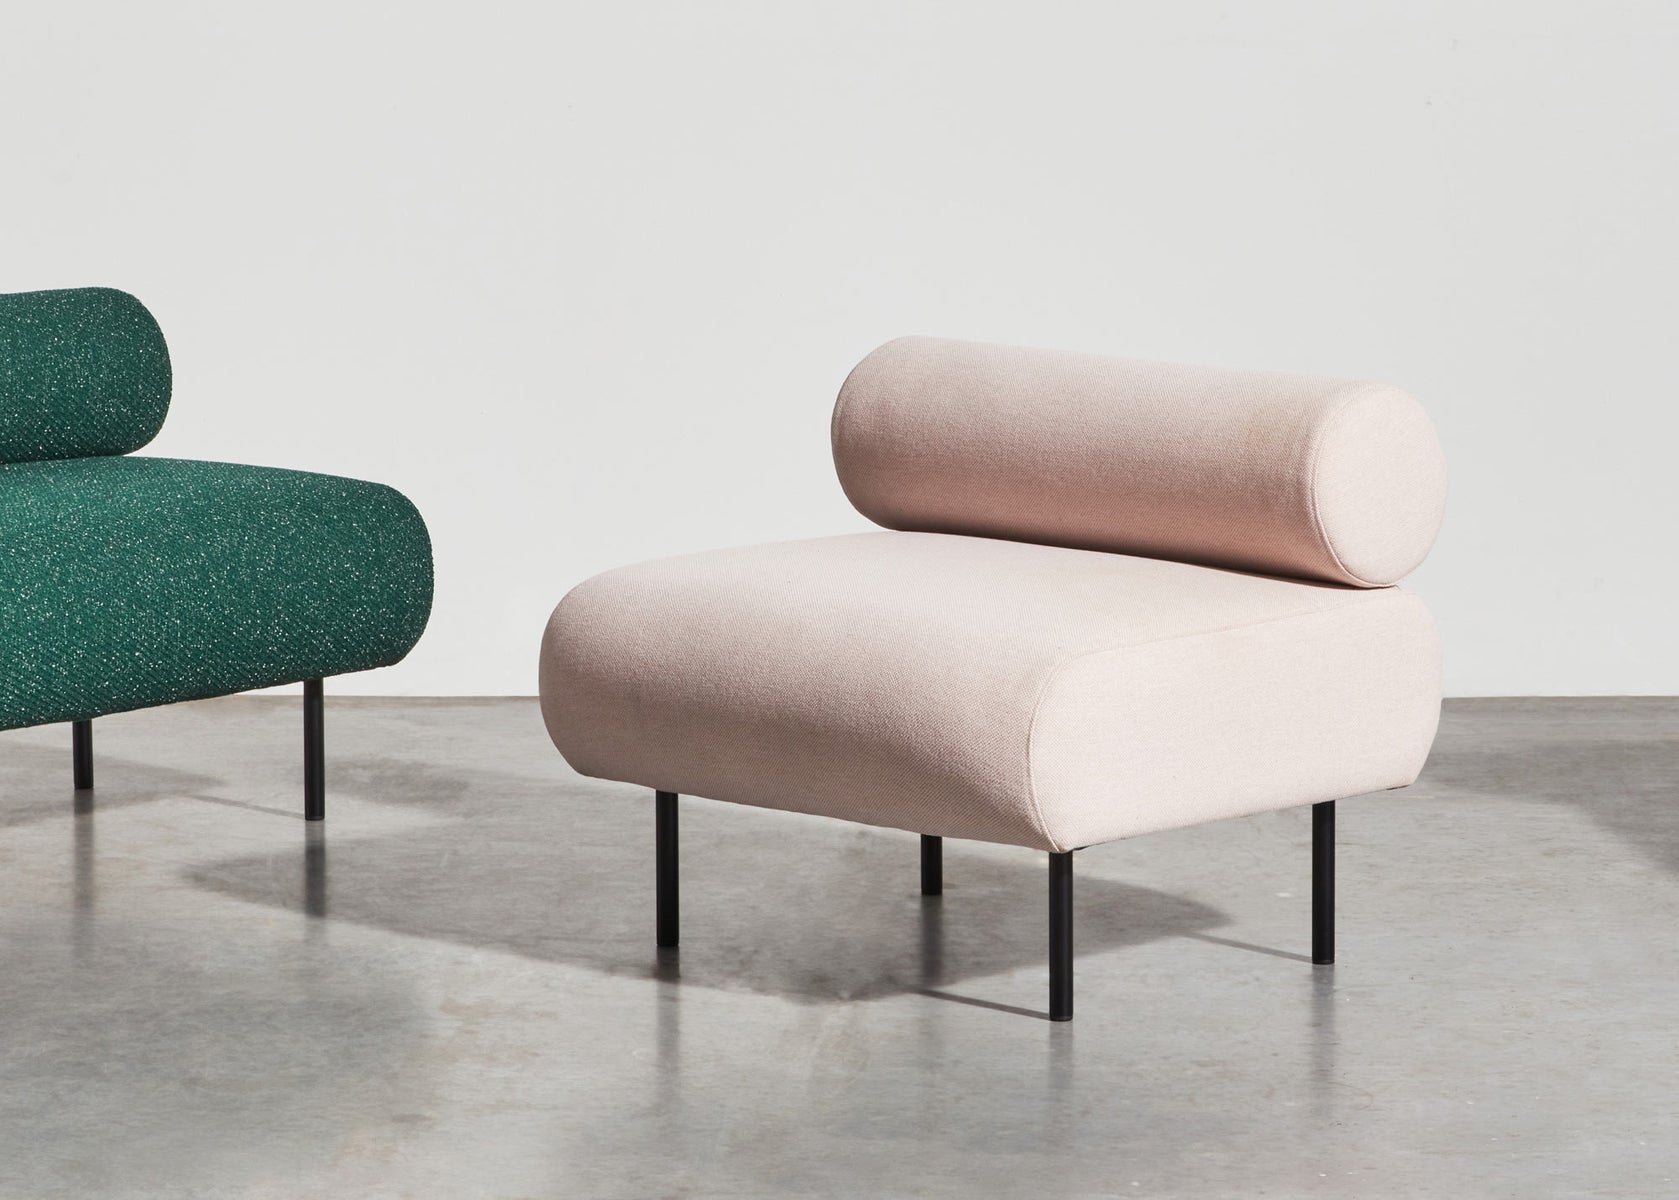 Cabin Seat by Gibson Karlo | DesignByThem | Fabric & Leather Upholstered Lounge | Gallery